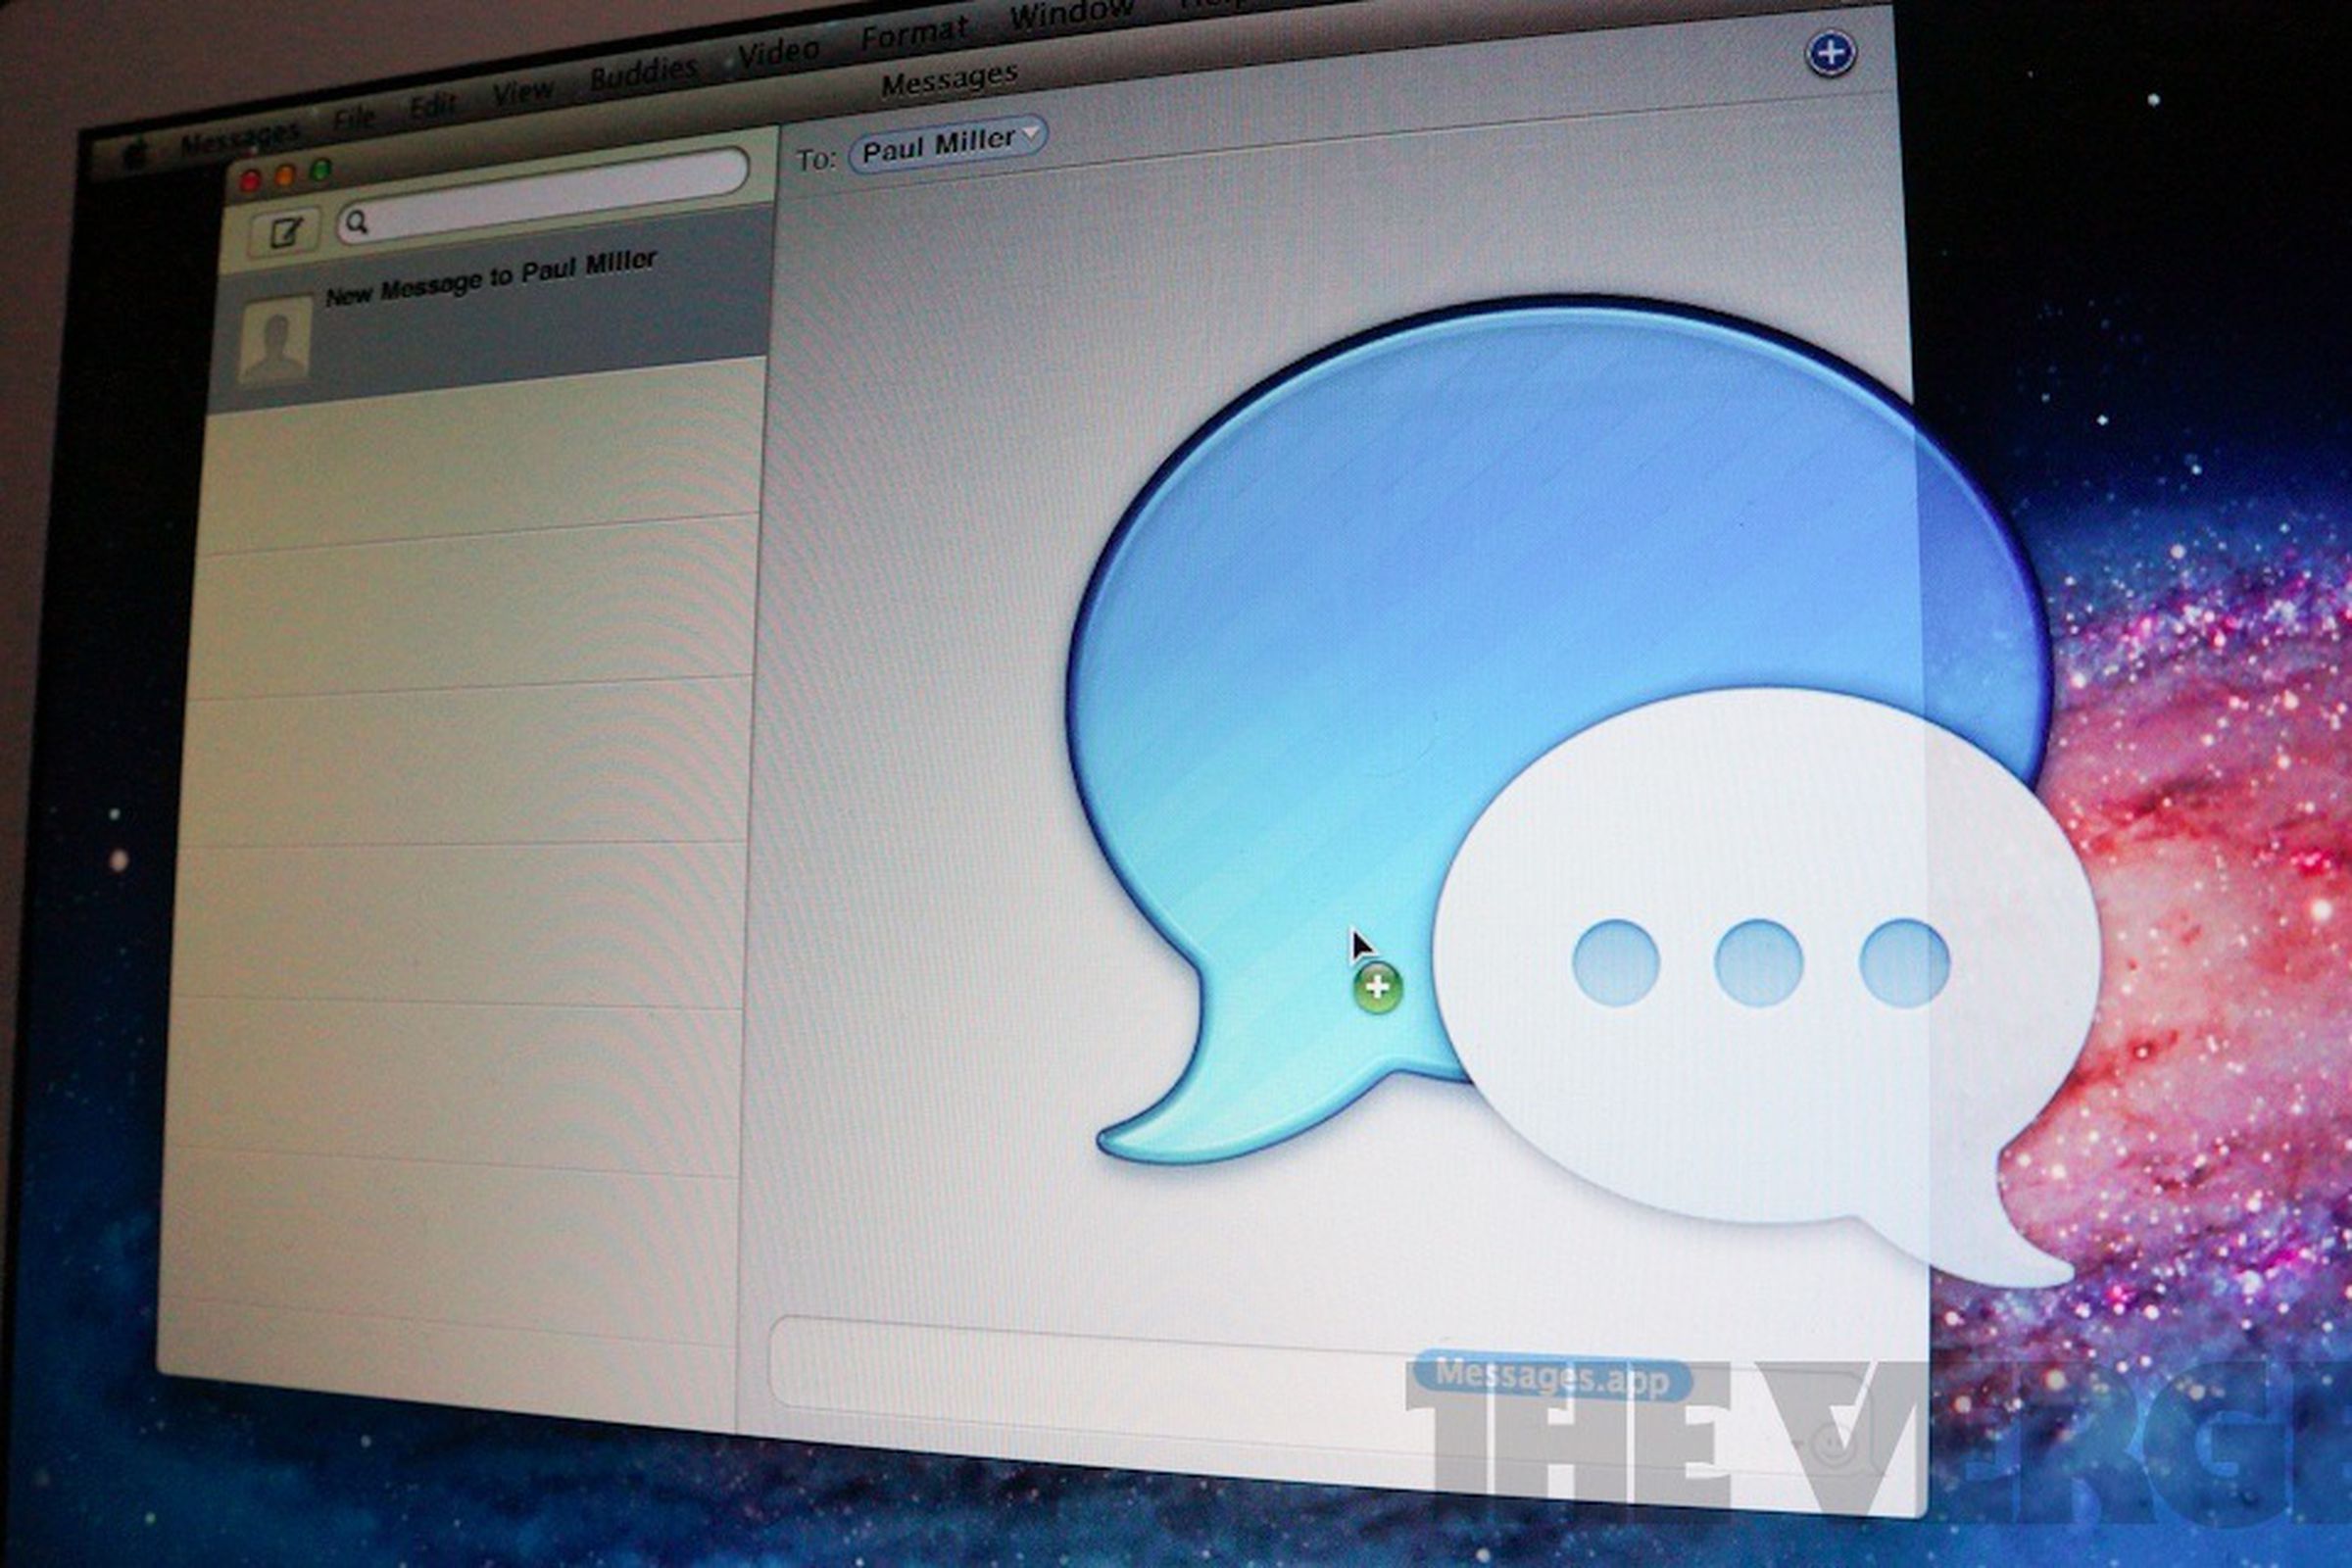 messages icon transfer 1020